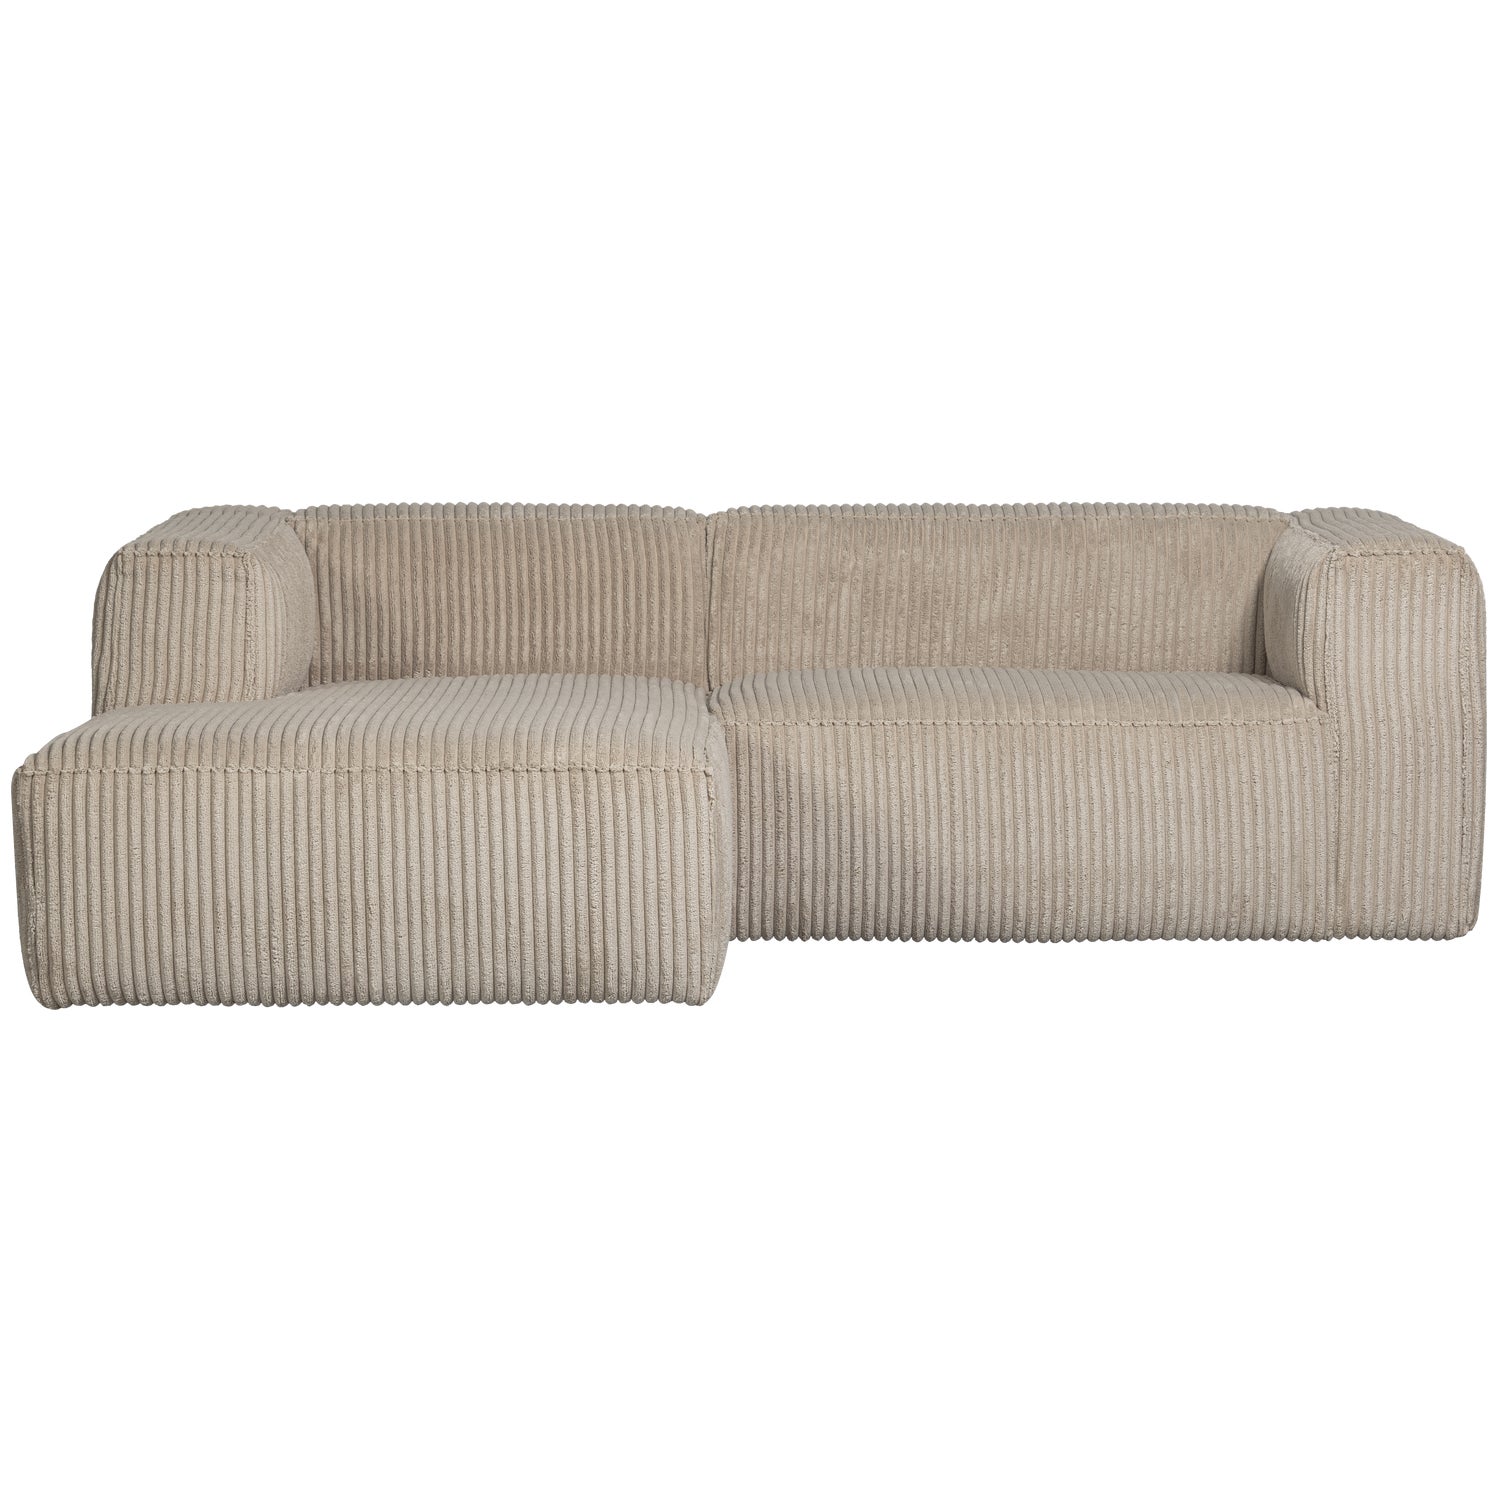 377432-RR-01_VS_WE_Bean_chaise_longue_links_grove_ribstof_travertin.png?auto=webp&format=png&width=1500&height=1500